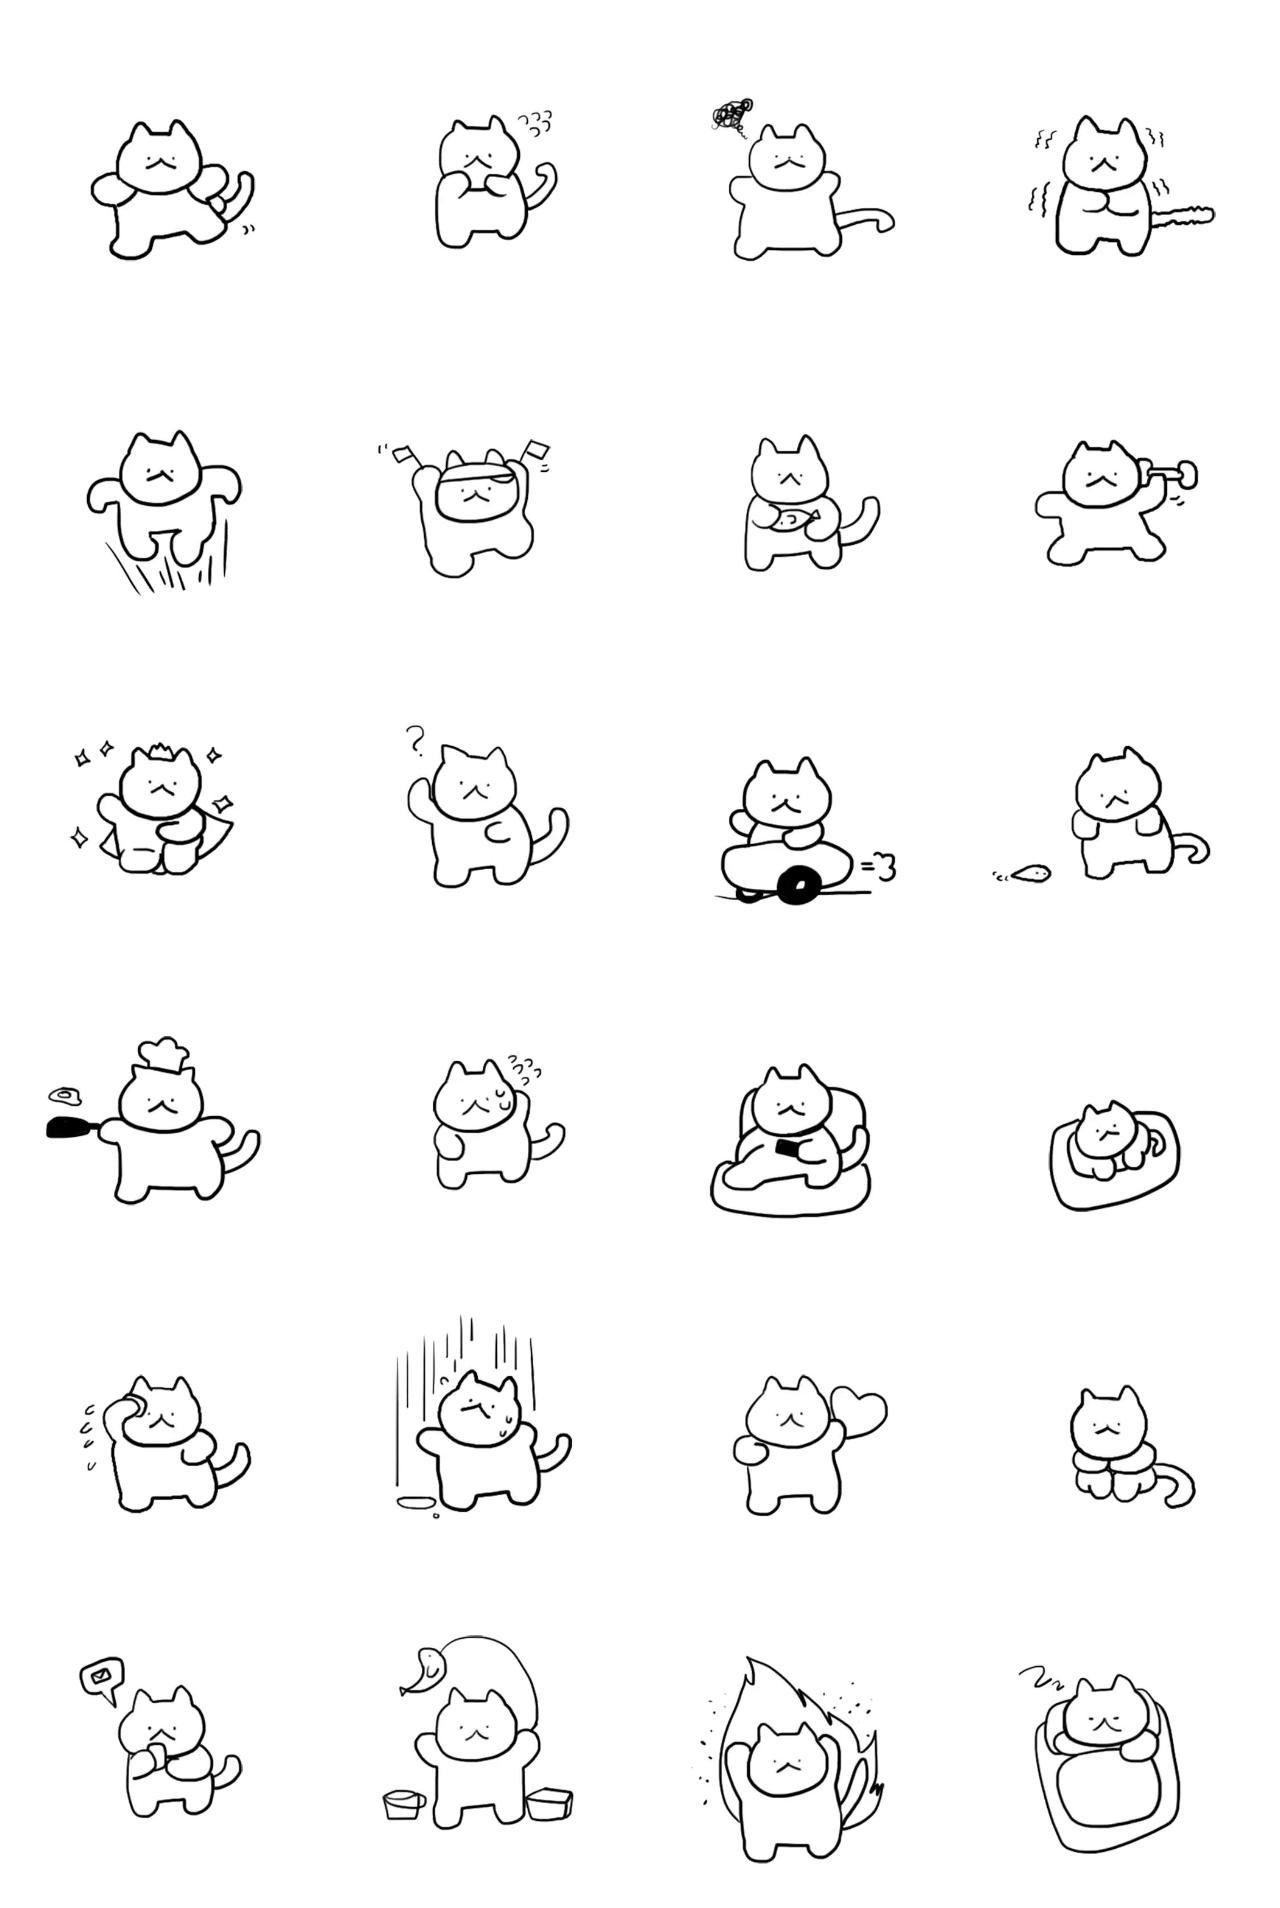 Yam goo Animation/Cartoon,Animals sticker pack for Whatsapp, Telegram, Signal, and others chatting and message apps